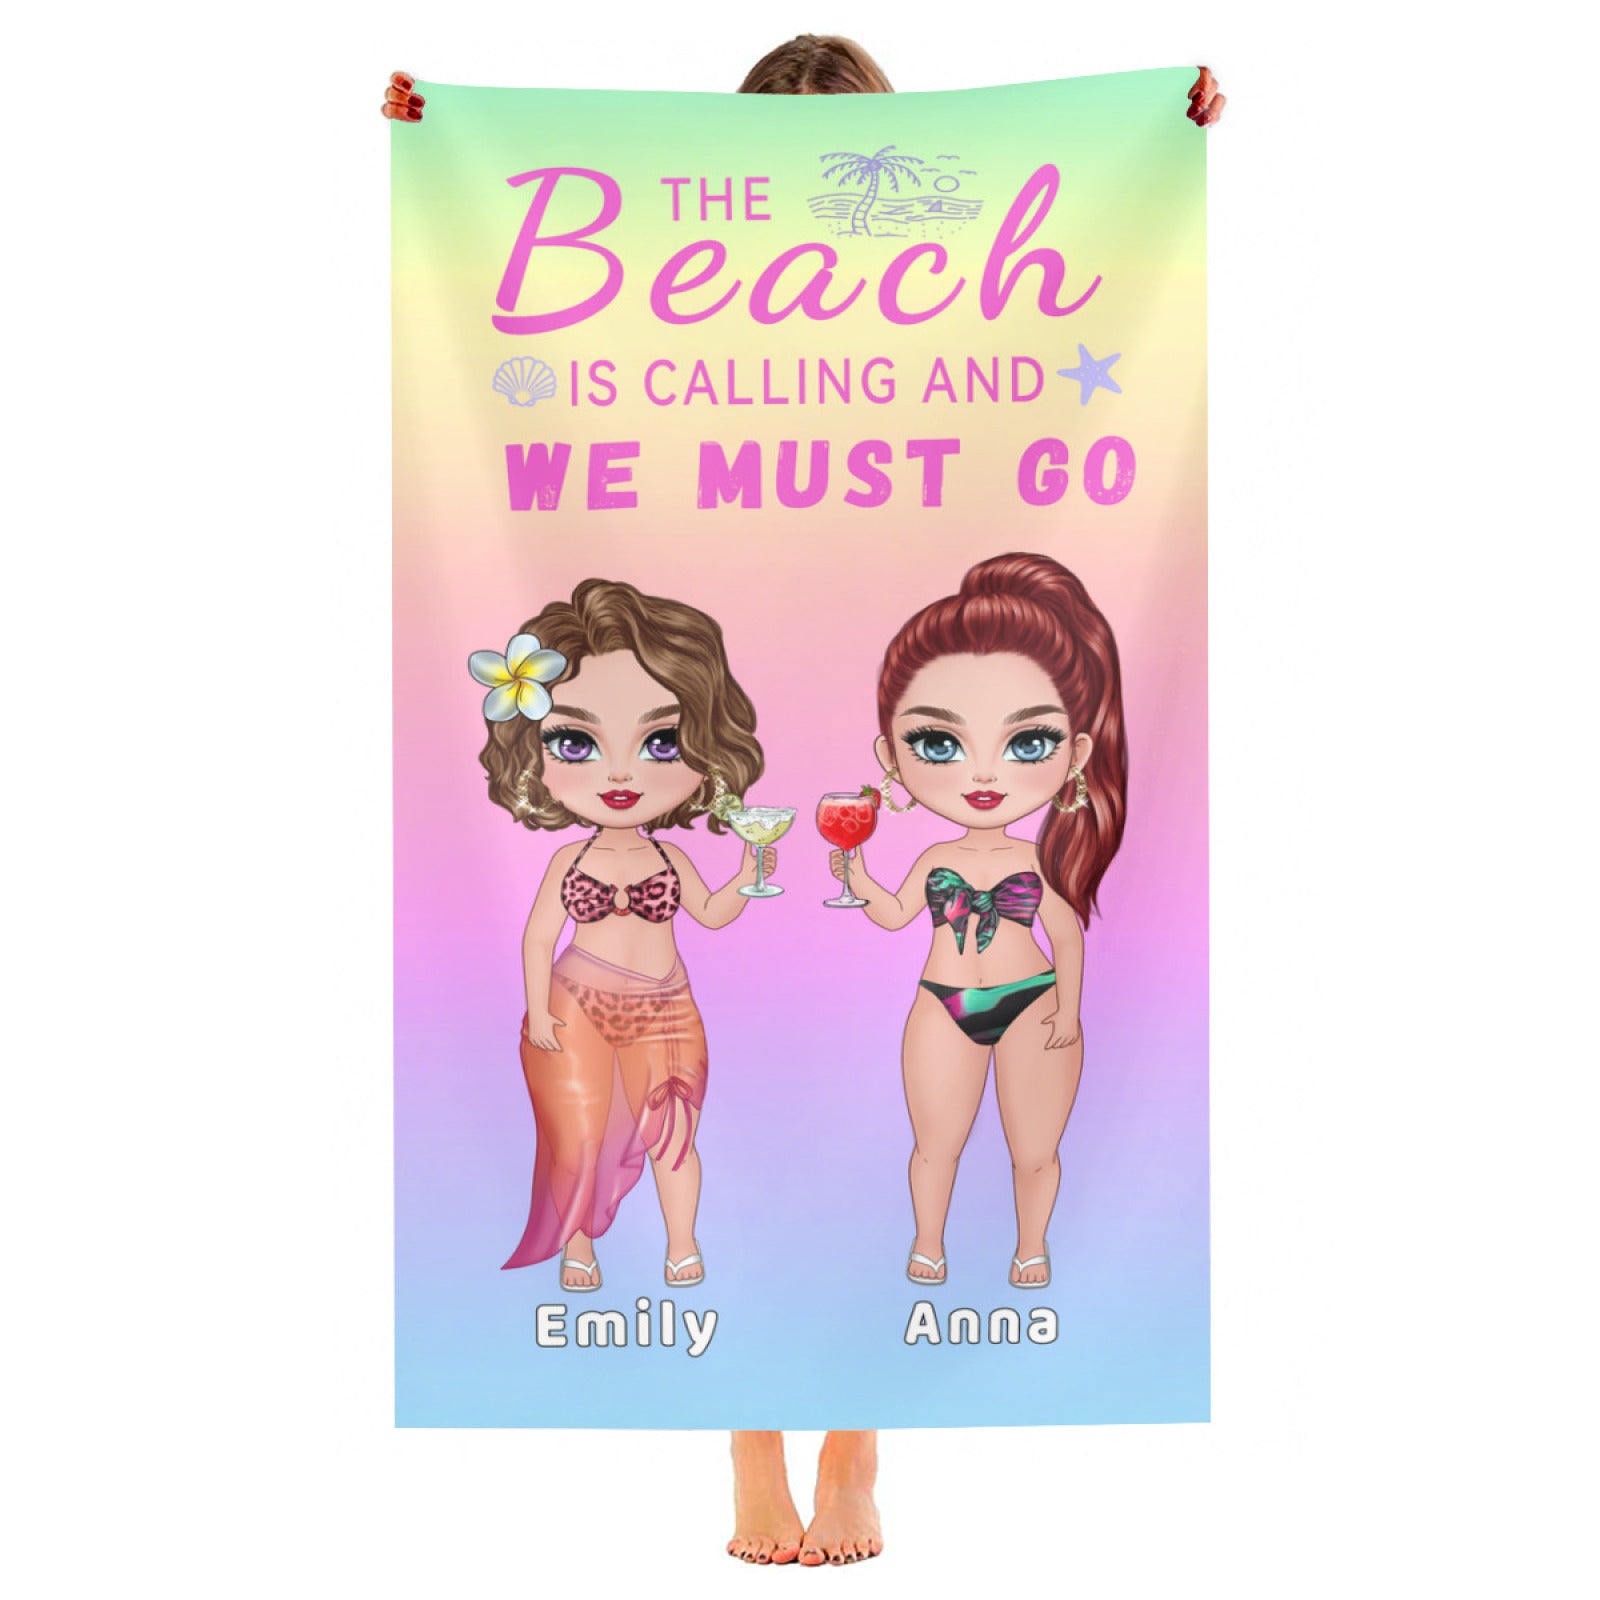 Vacation Beach Swimming Picnic Traveling - Birthday, Holiday, Funny Gift For Her, Him, Besties, Family - Personalized Custom Beach Towel - colorfulcustom